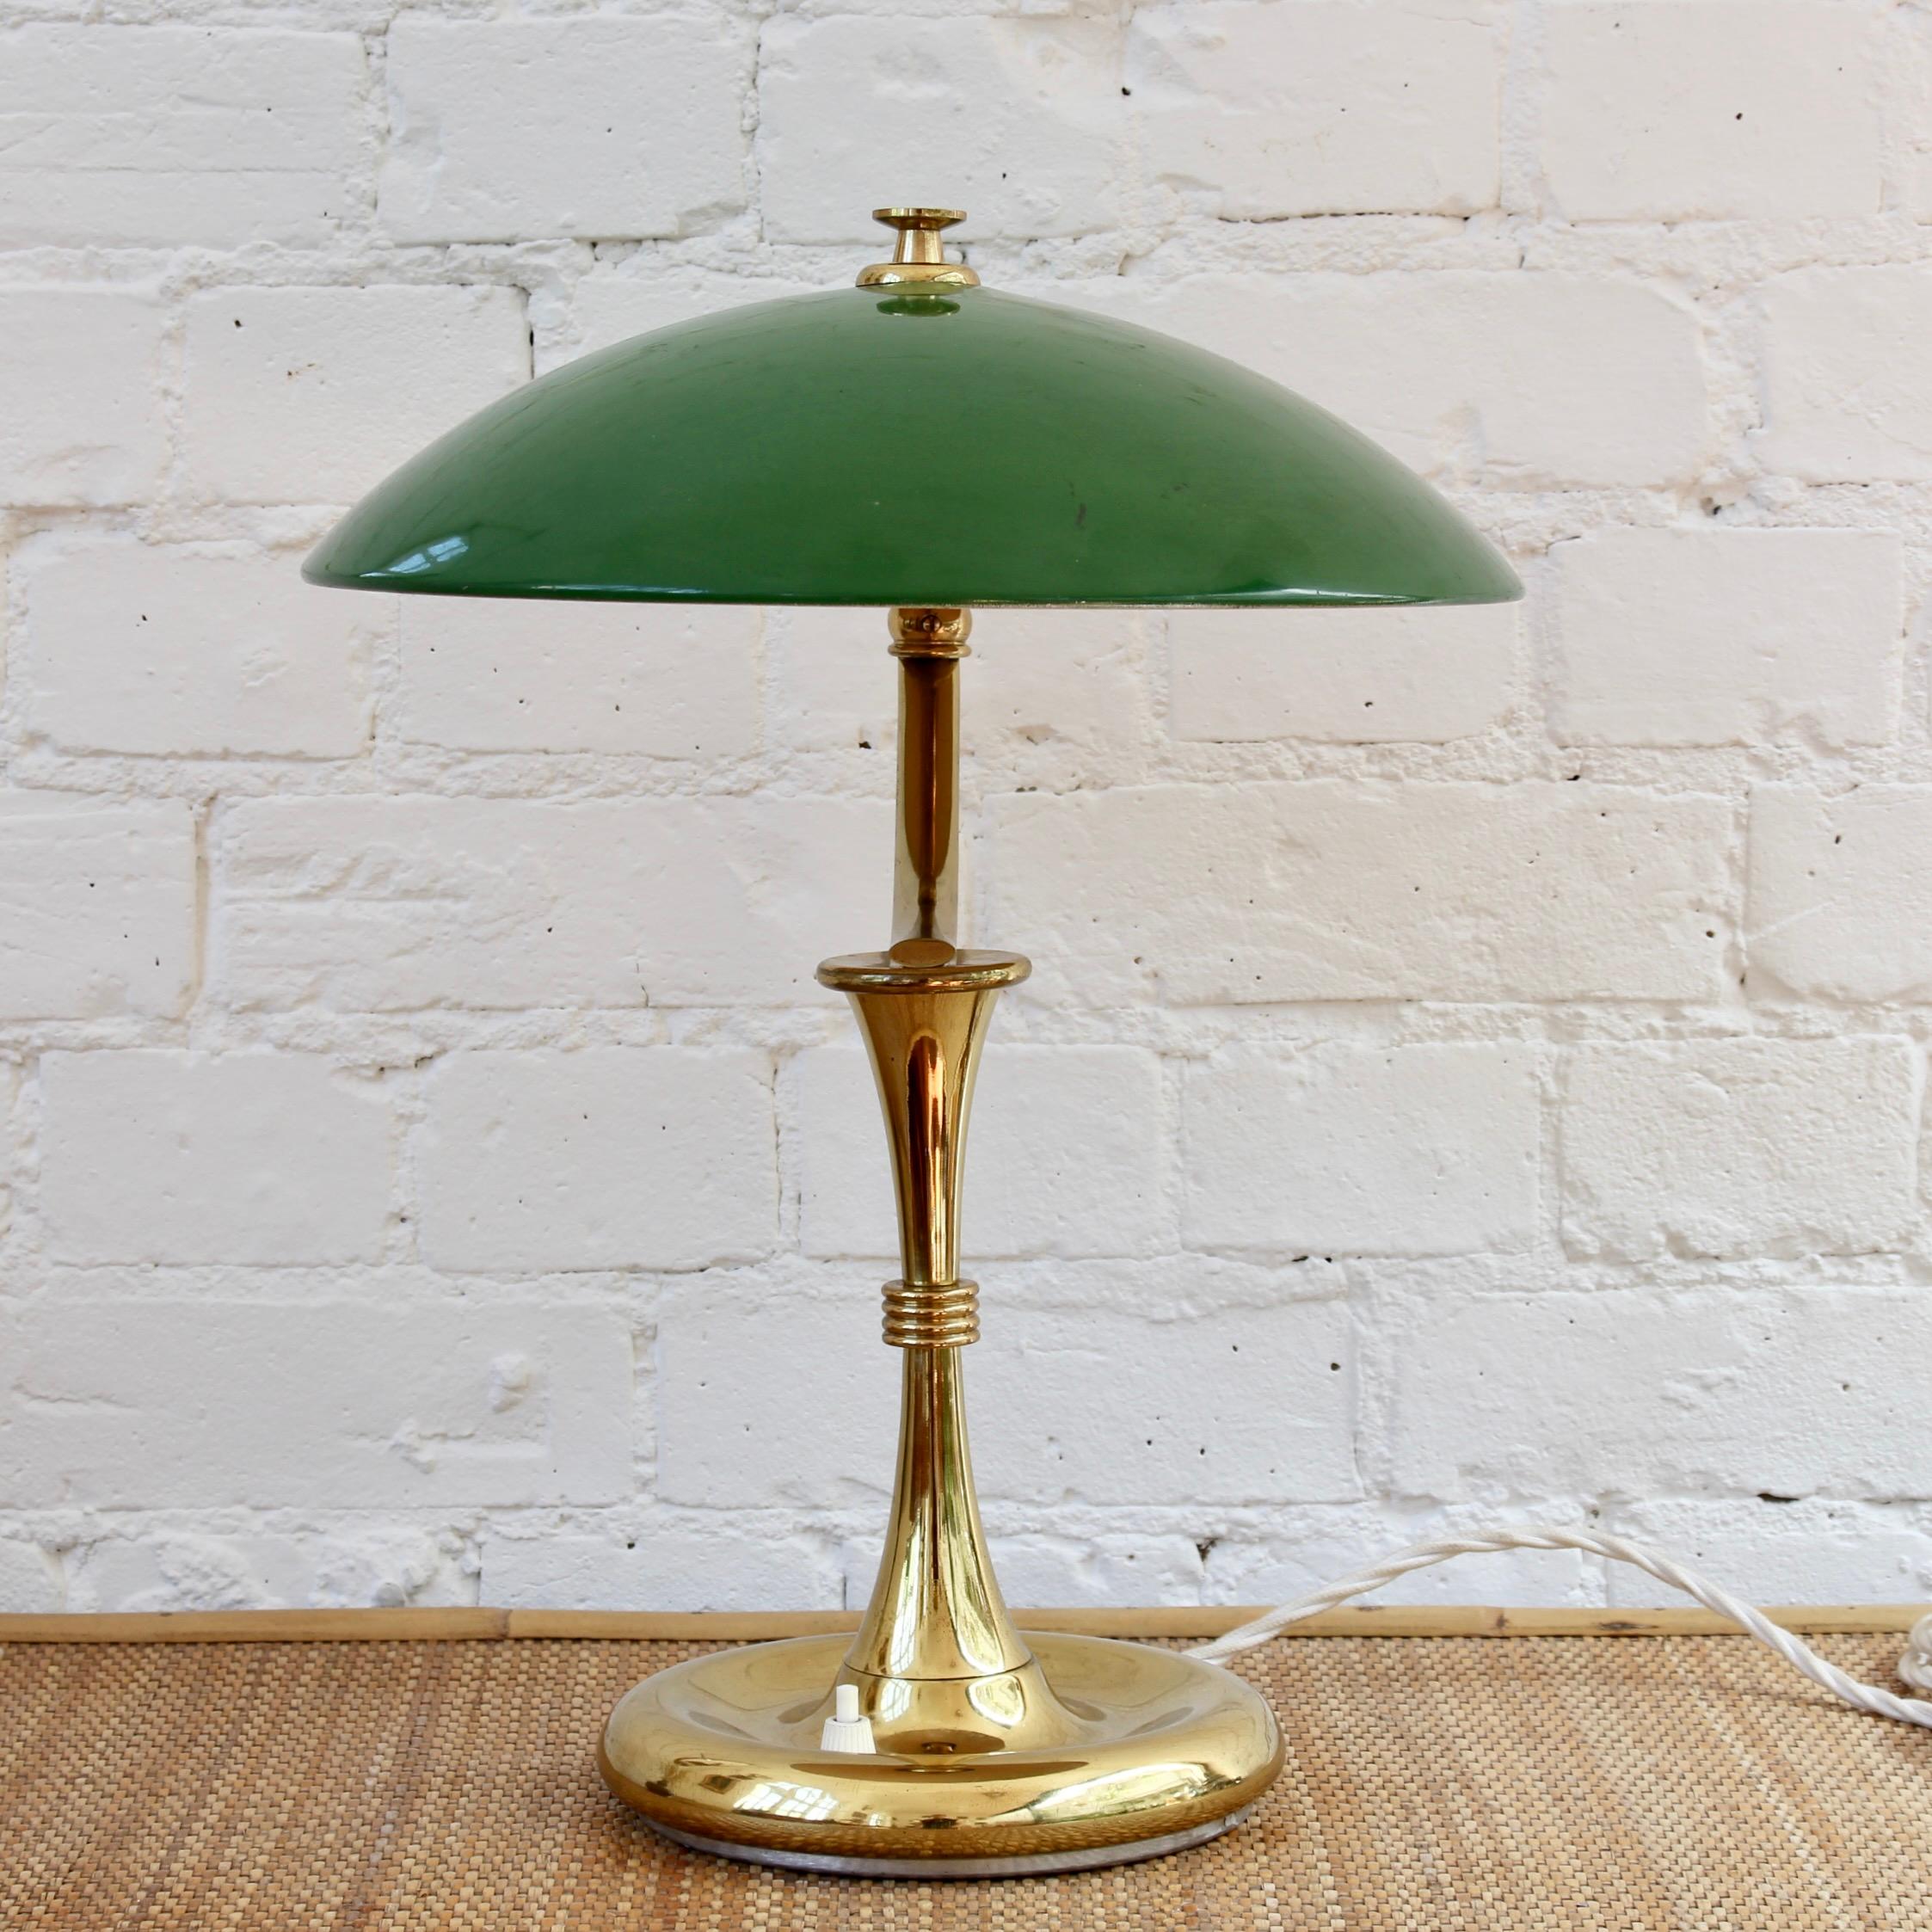 Italian Mid-Century Brass-Covered Desk Lamp with Green Shade 'circa 1950s' In Good Condition For Sale In London, GB